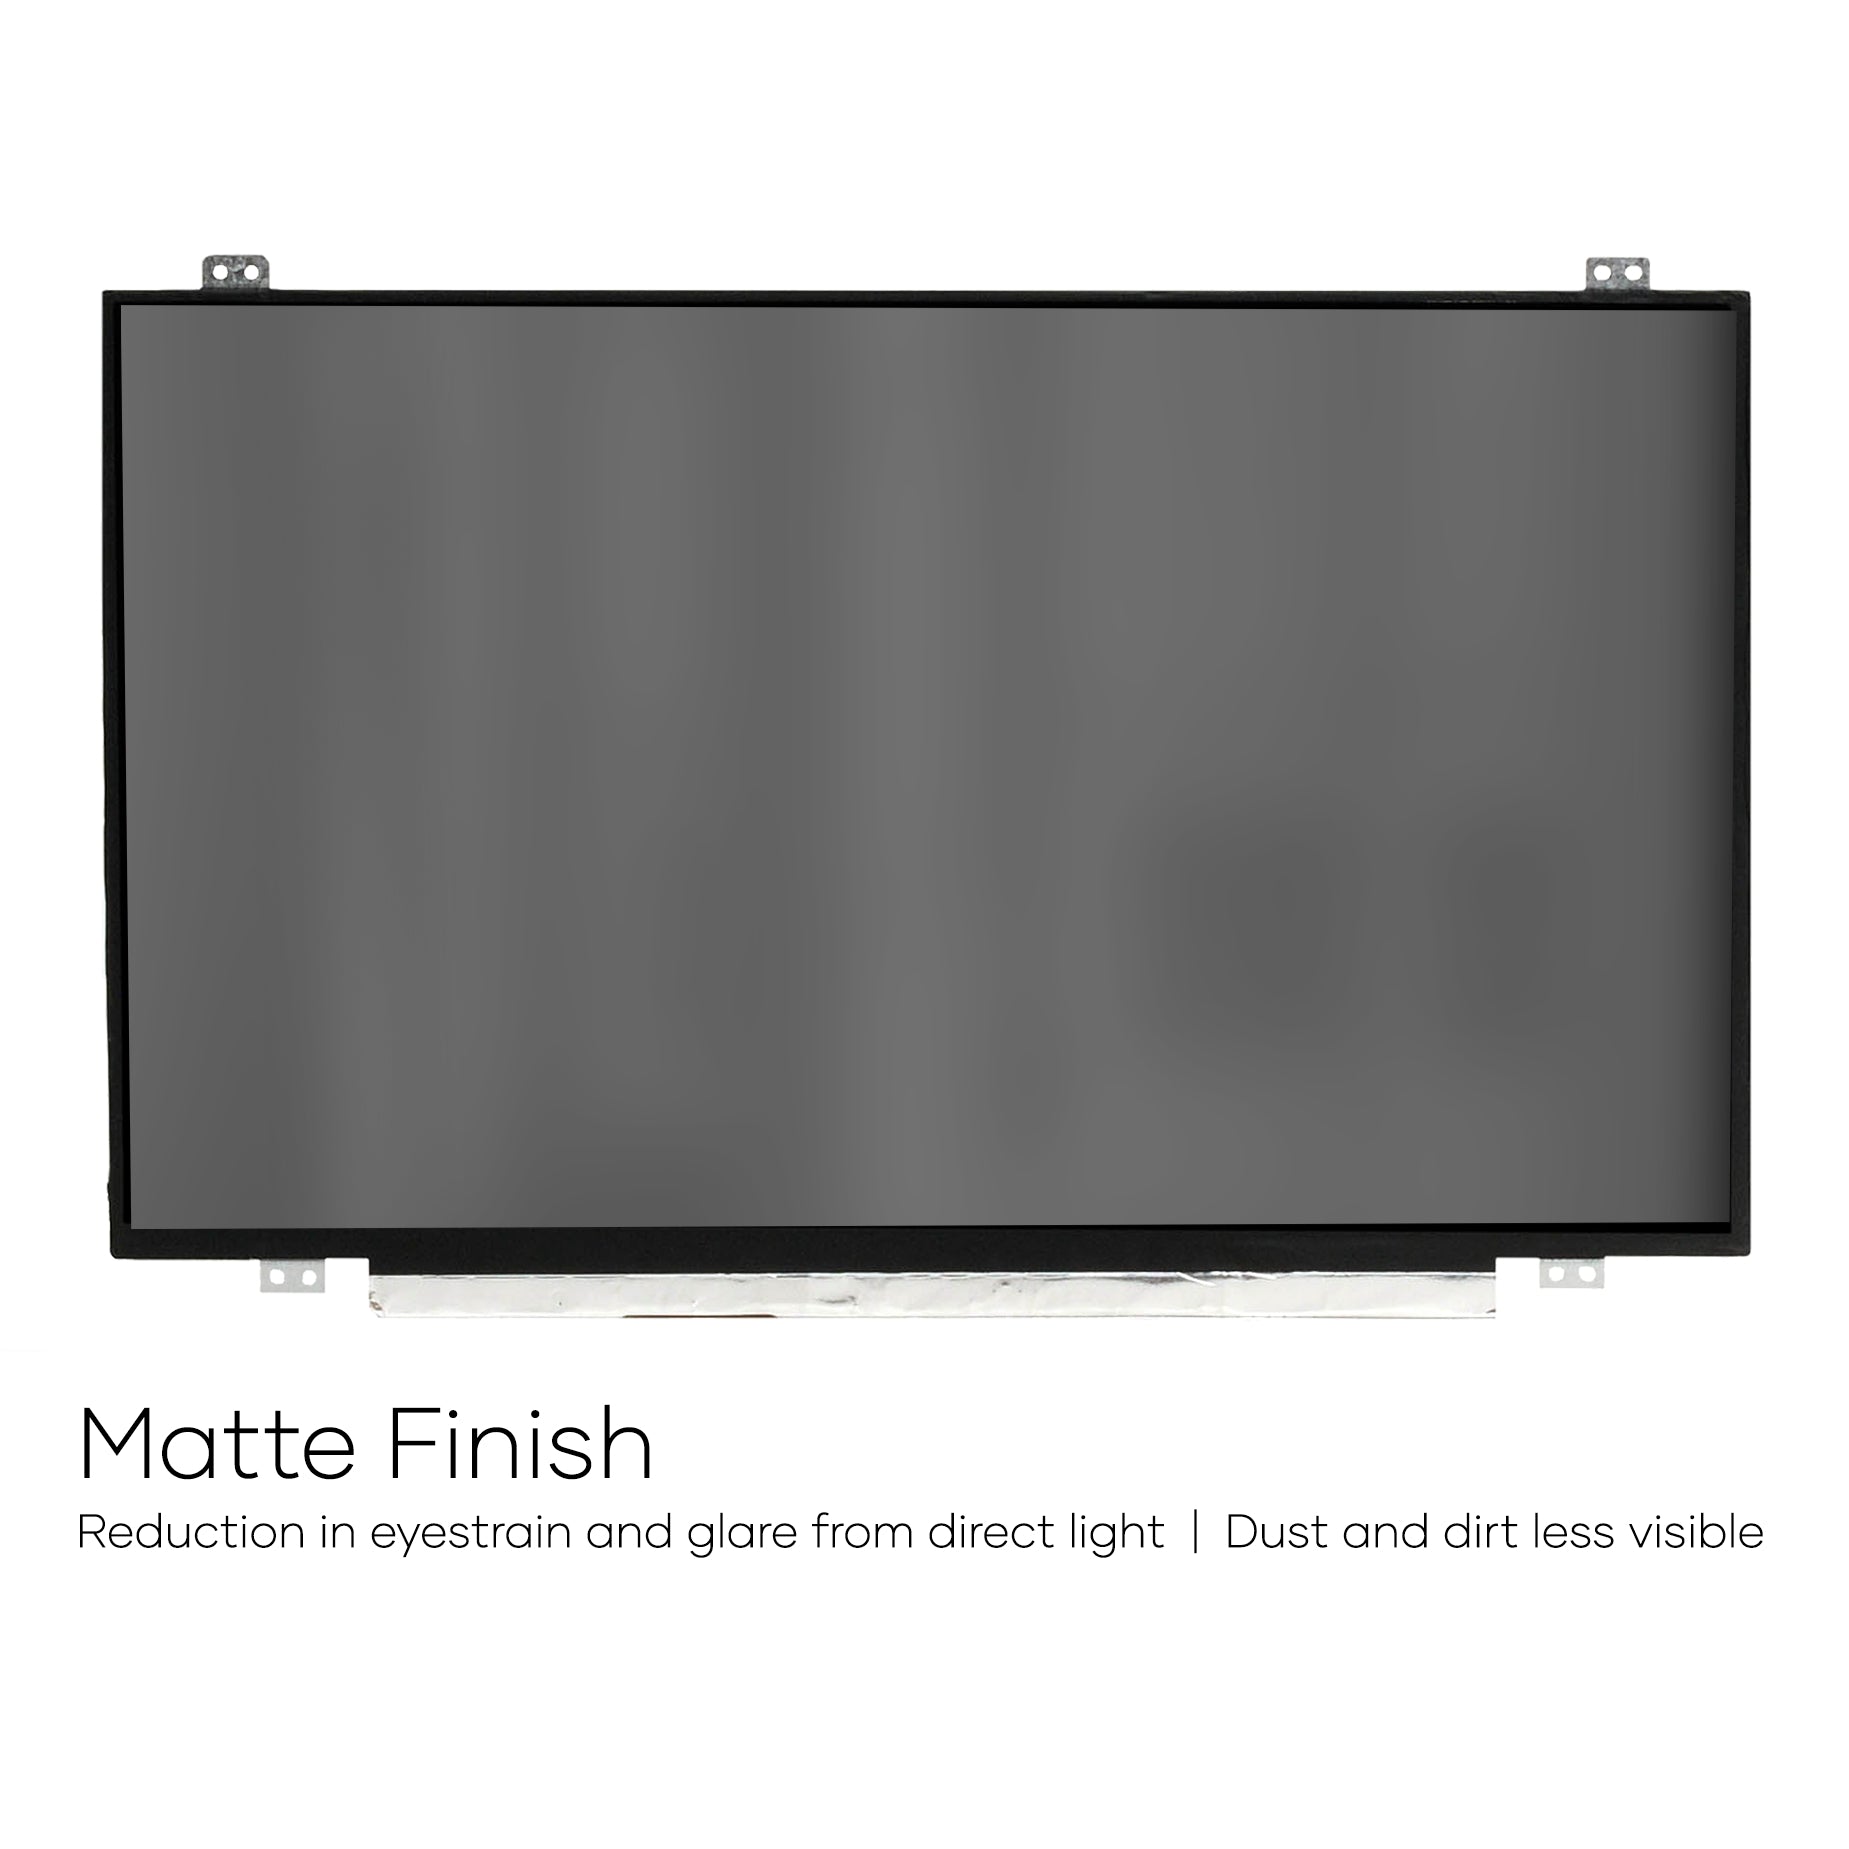 Screen Replacement for B140HAN02.6 FHD 1920x1080 IPS Matte LCD LED Display